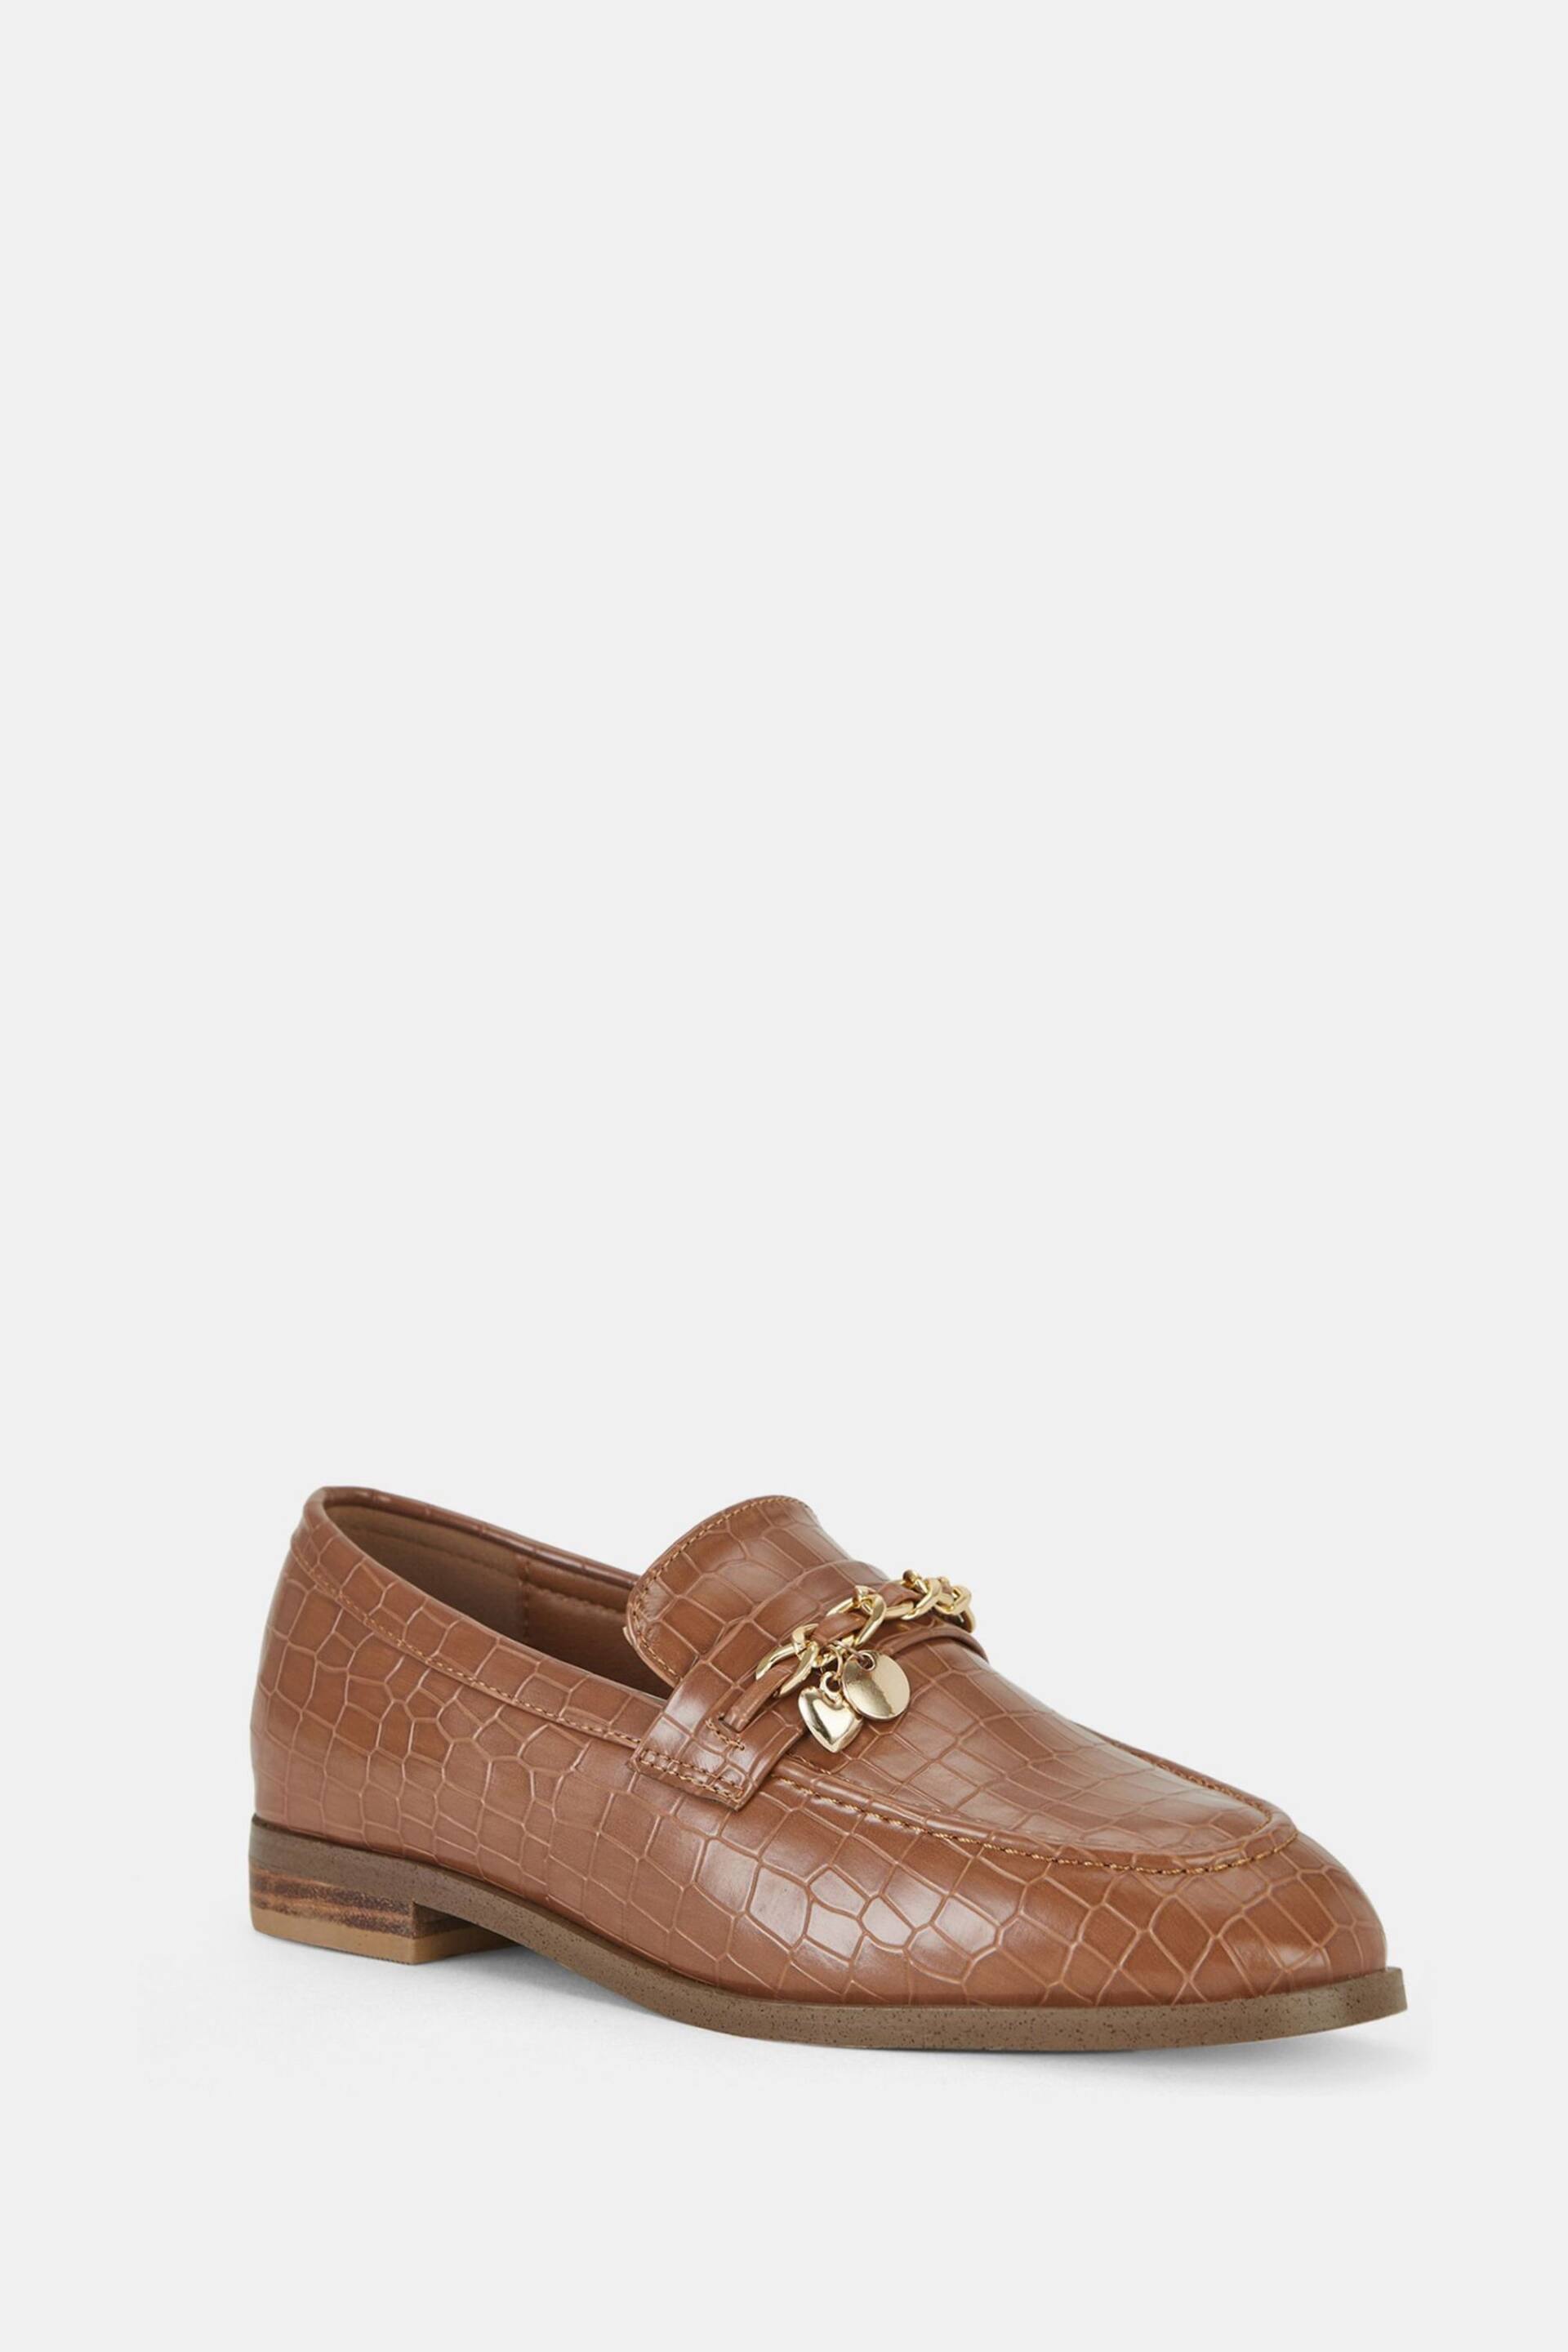 Novo Brown Wide Fit Elio Faux Croc Flat Loafers - Image 3 of 4